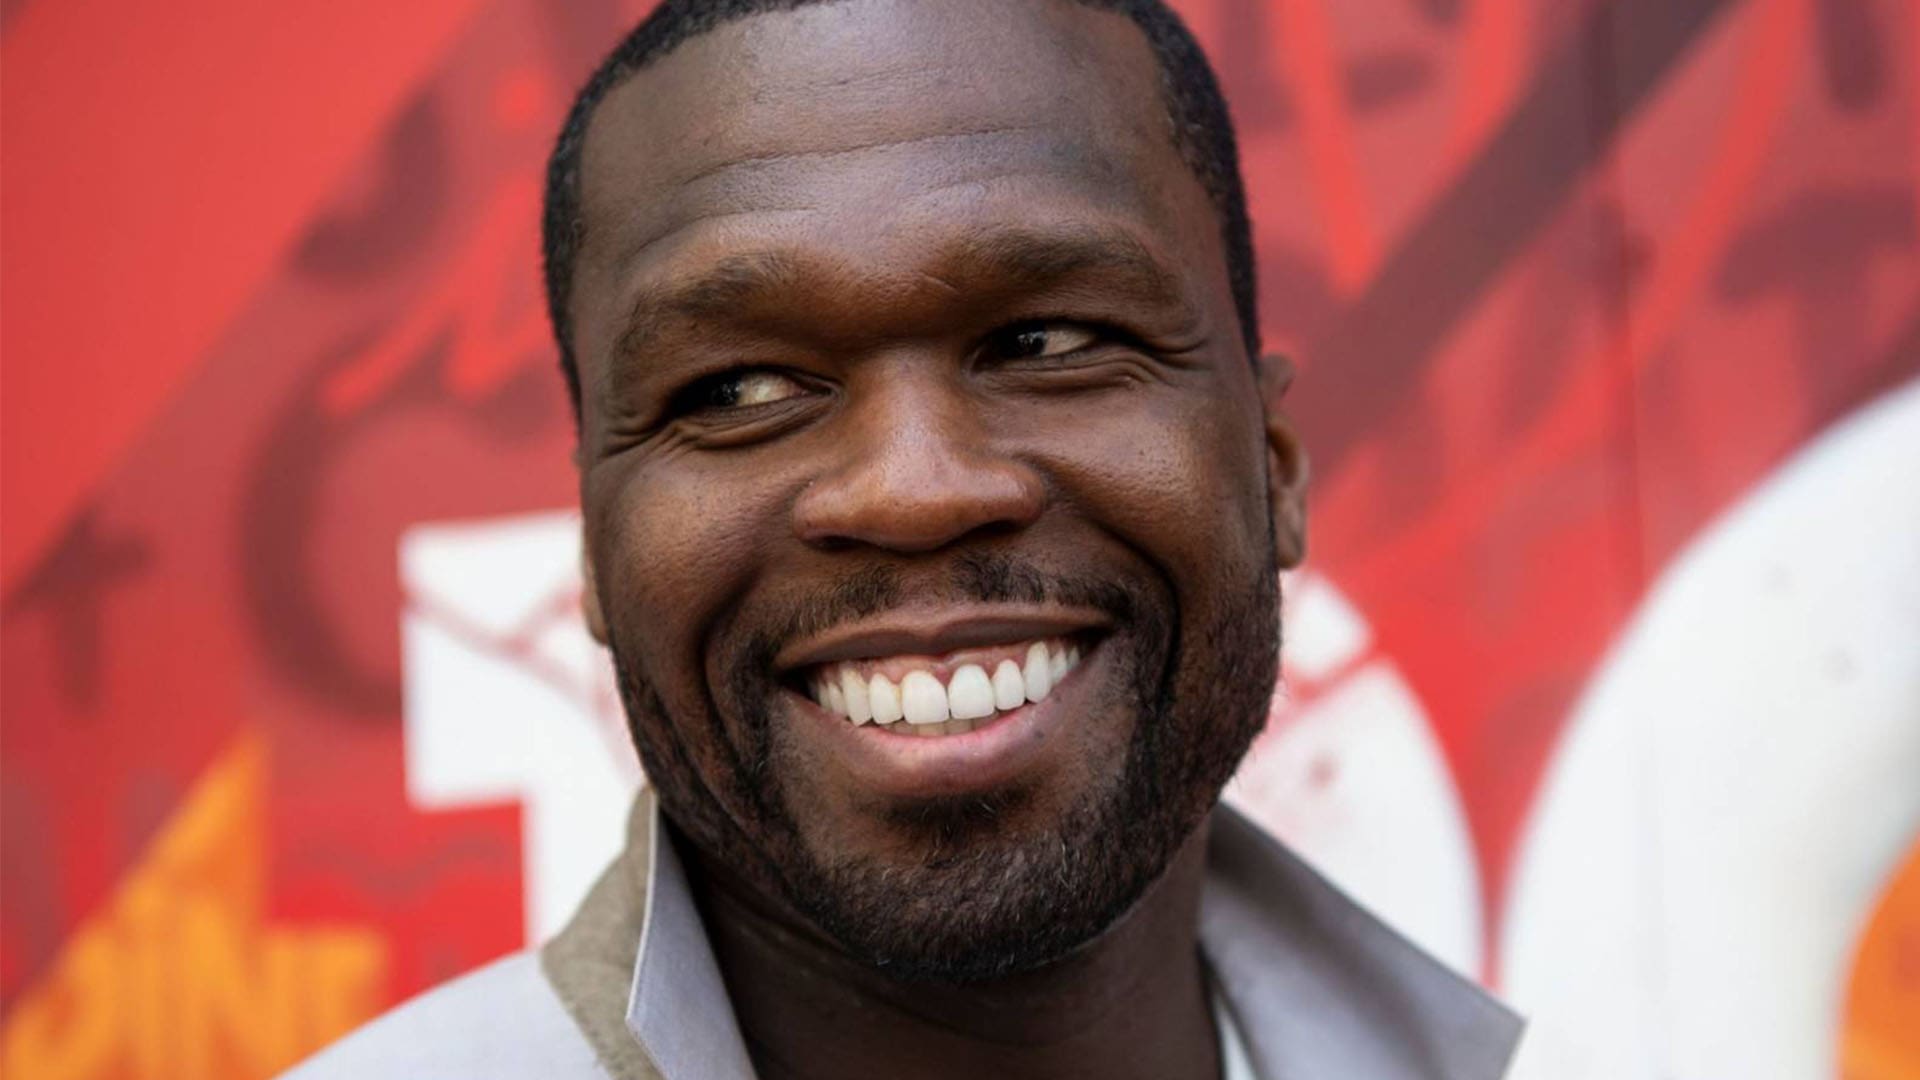 50 Cent Makes Some Fans Laugh With This Coronavirus-Related Video